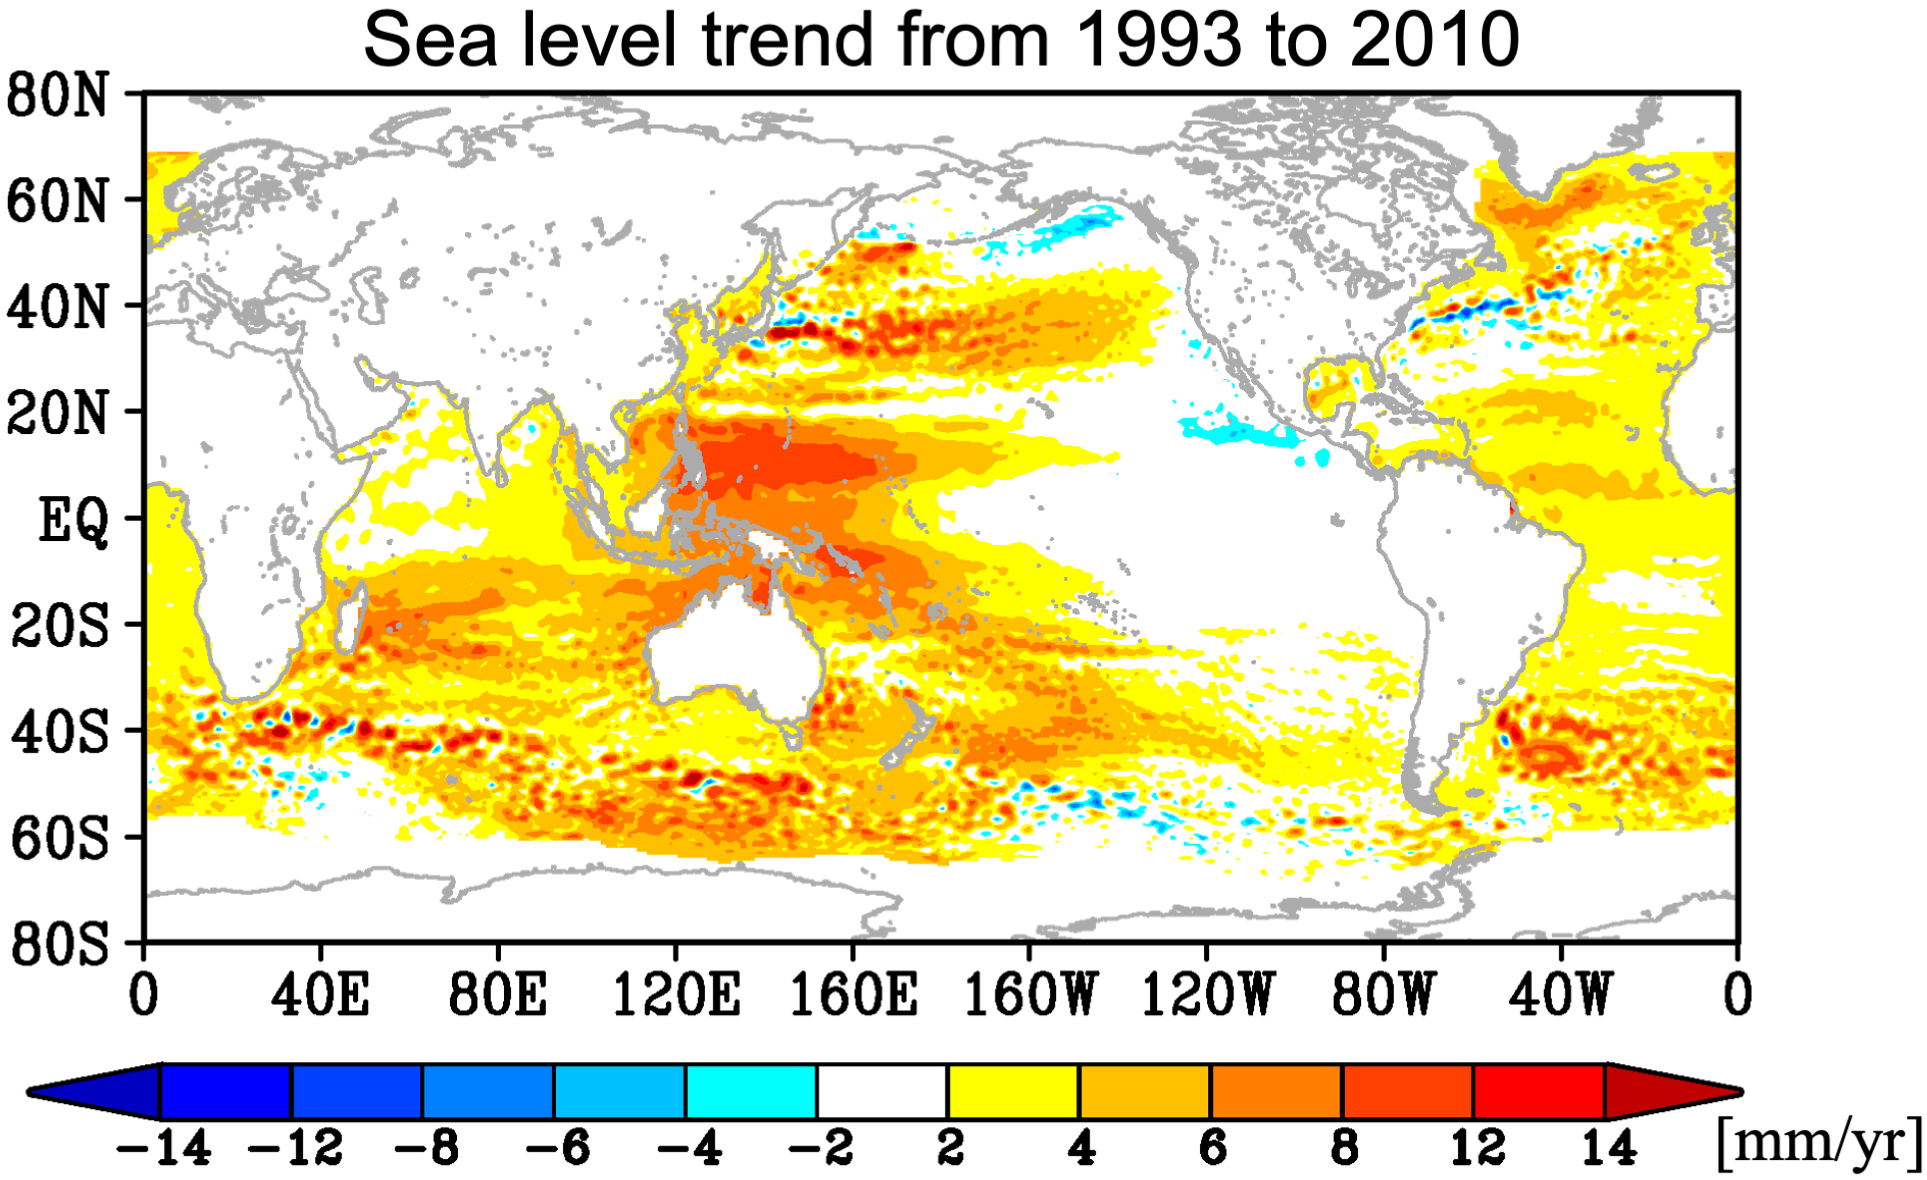 Sea level fluctuations vary from sea area to sea area.